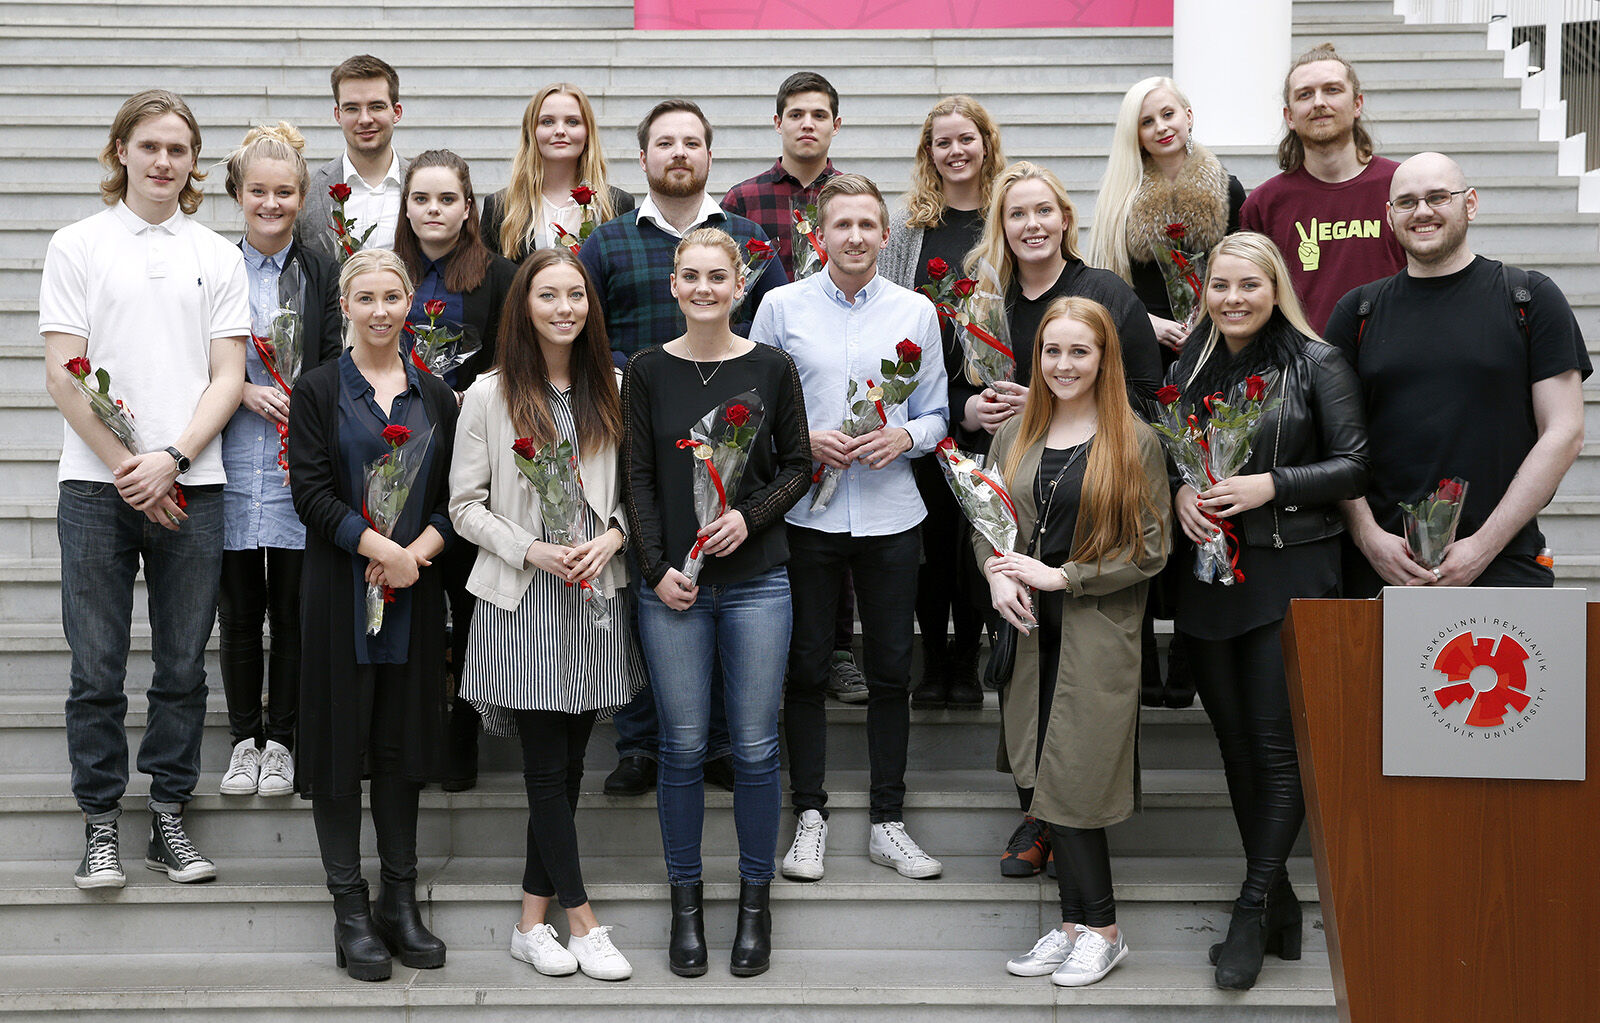 Students stand with roses in the steps in the sun